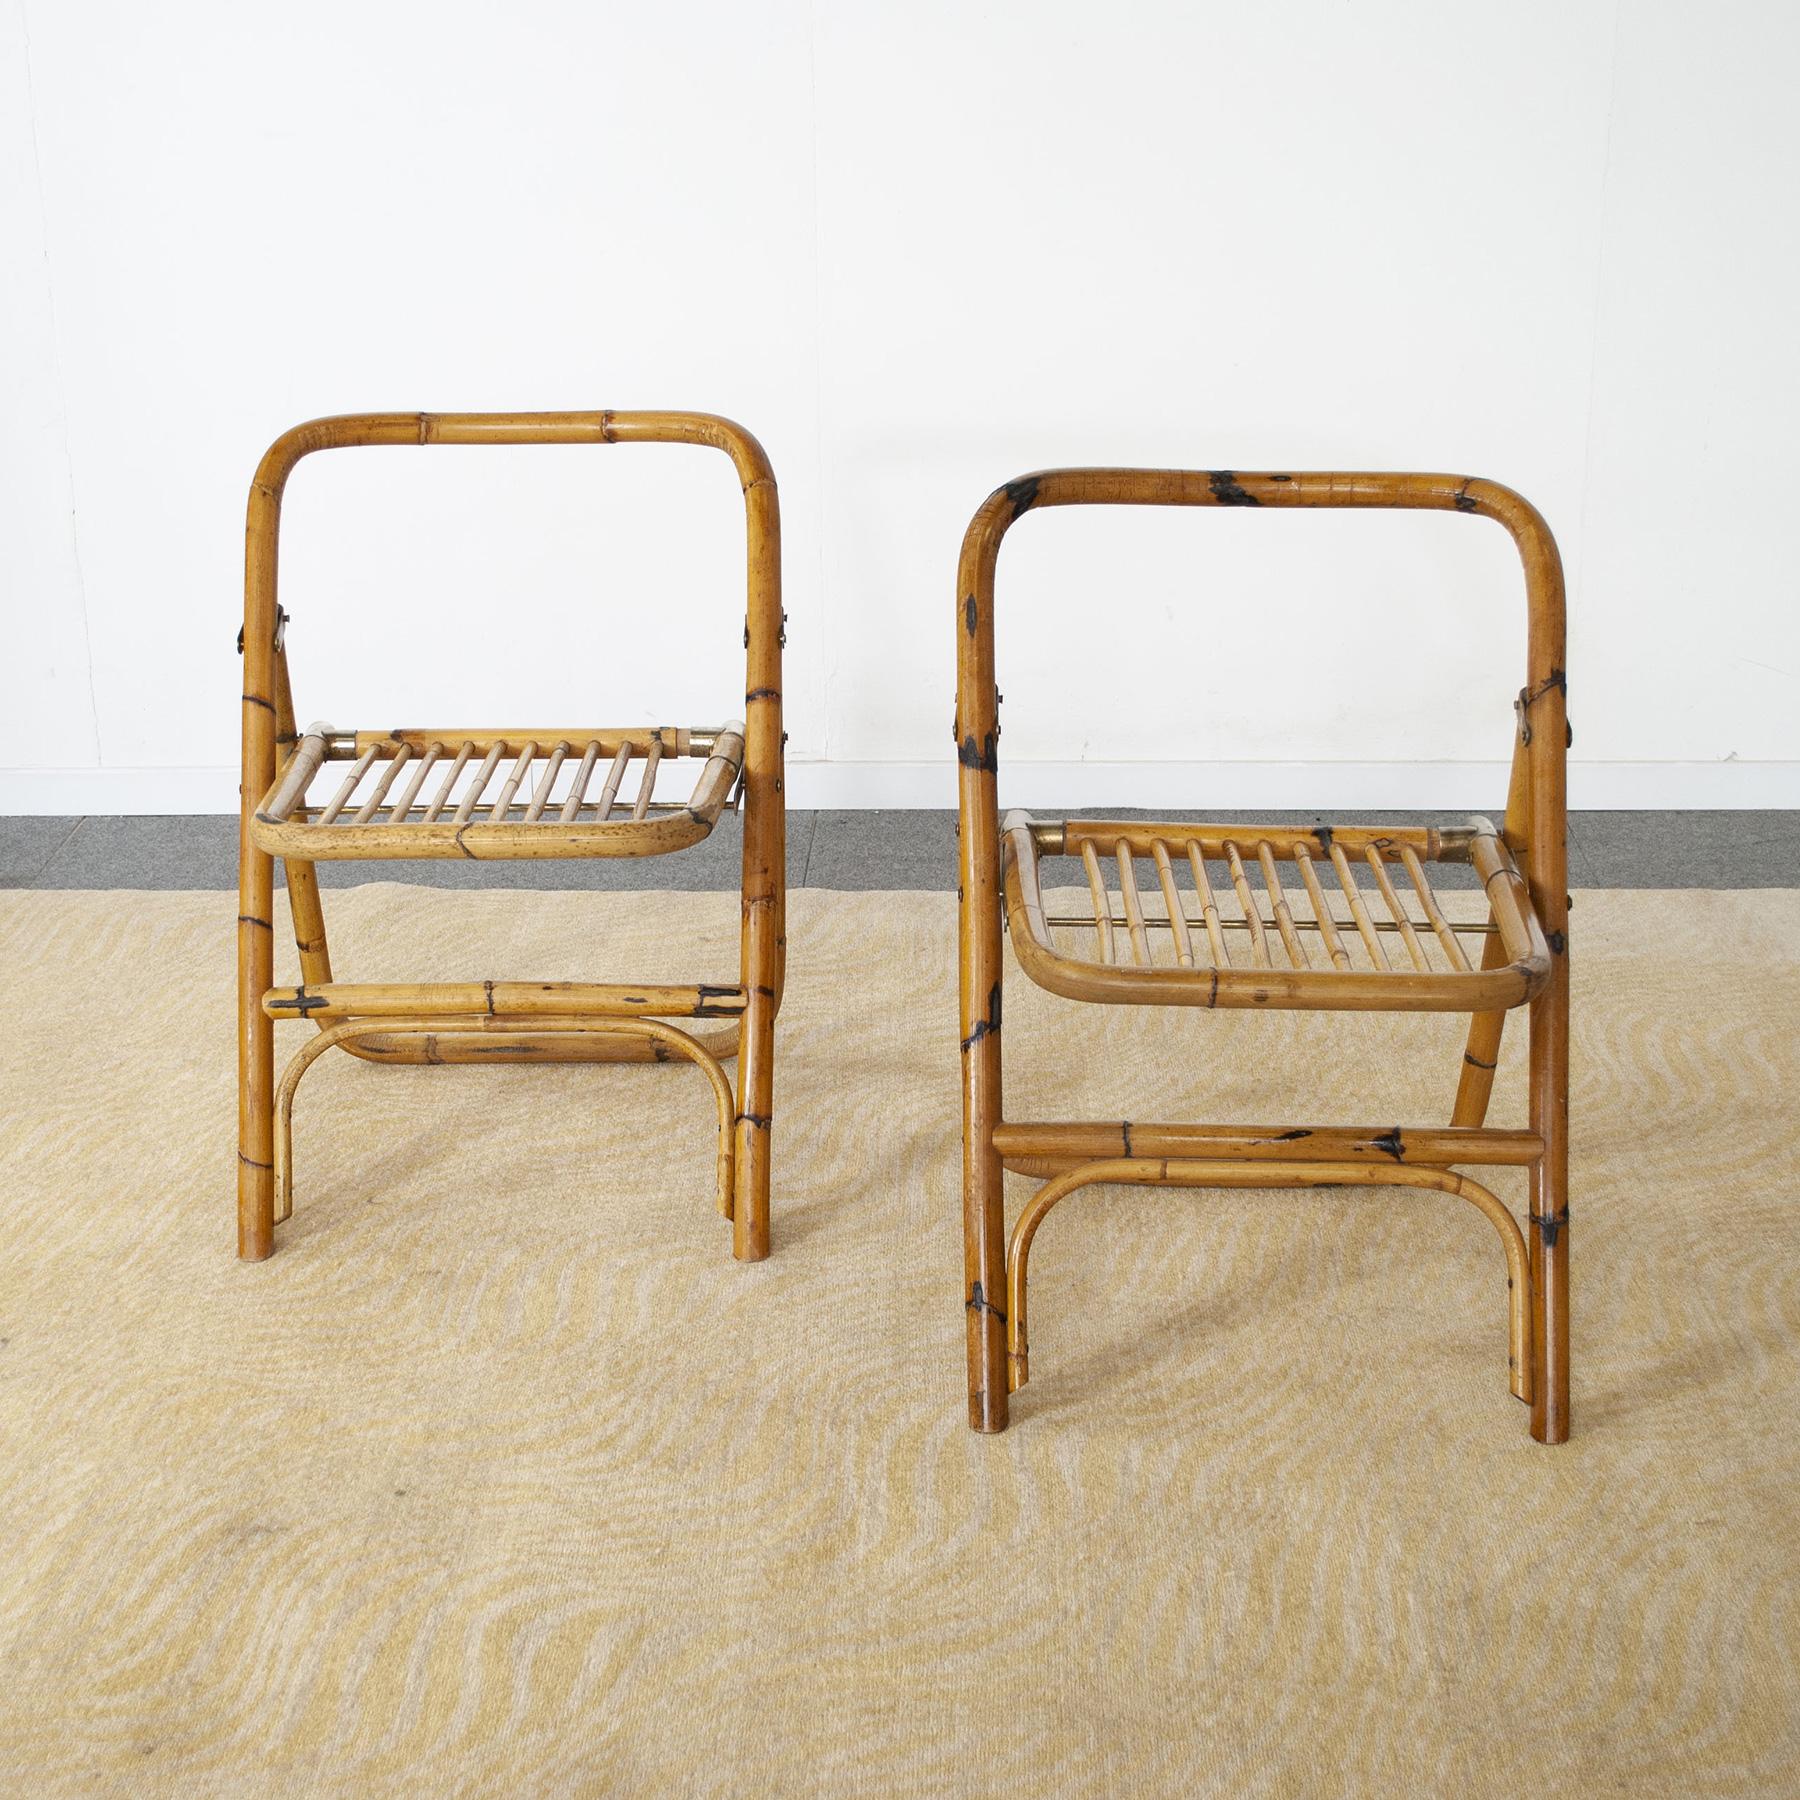 Dal Vera Italian Mid Century Pair of Bamboo Chairs In Good Condition For Sale In bari, IT